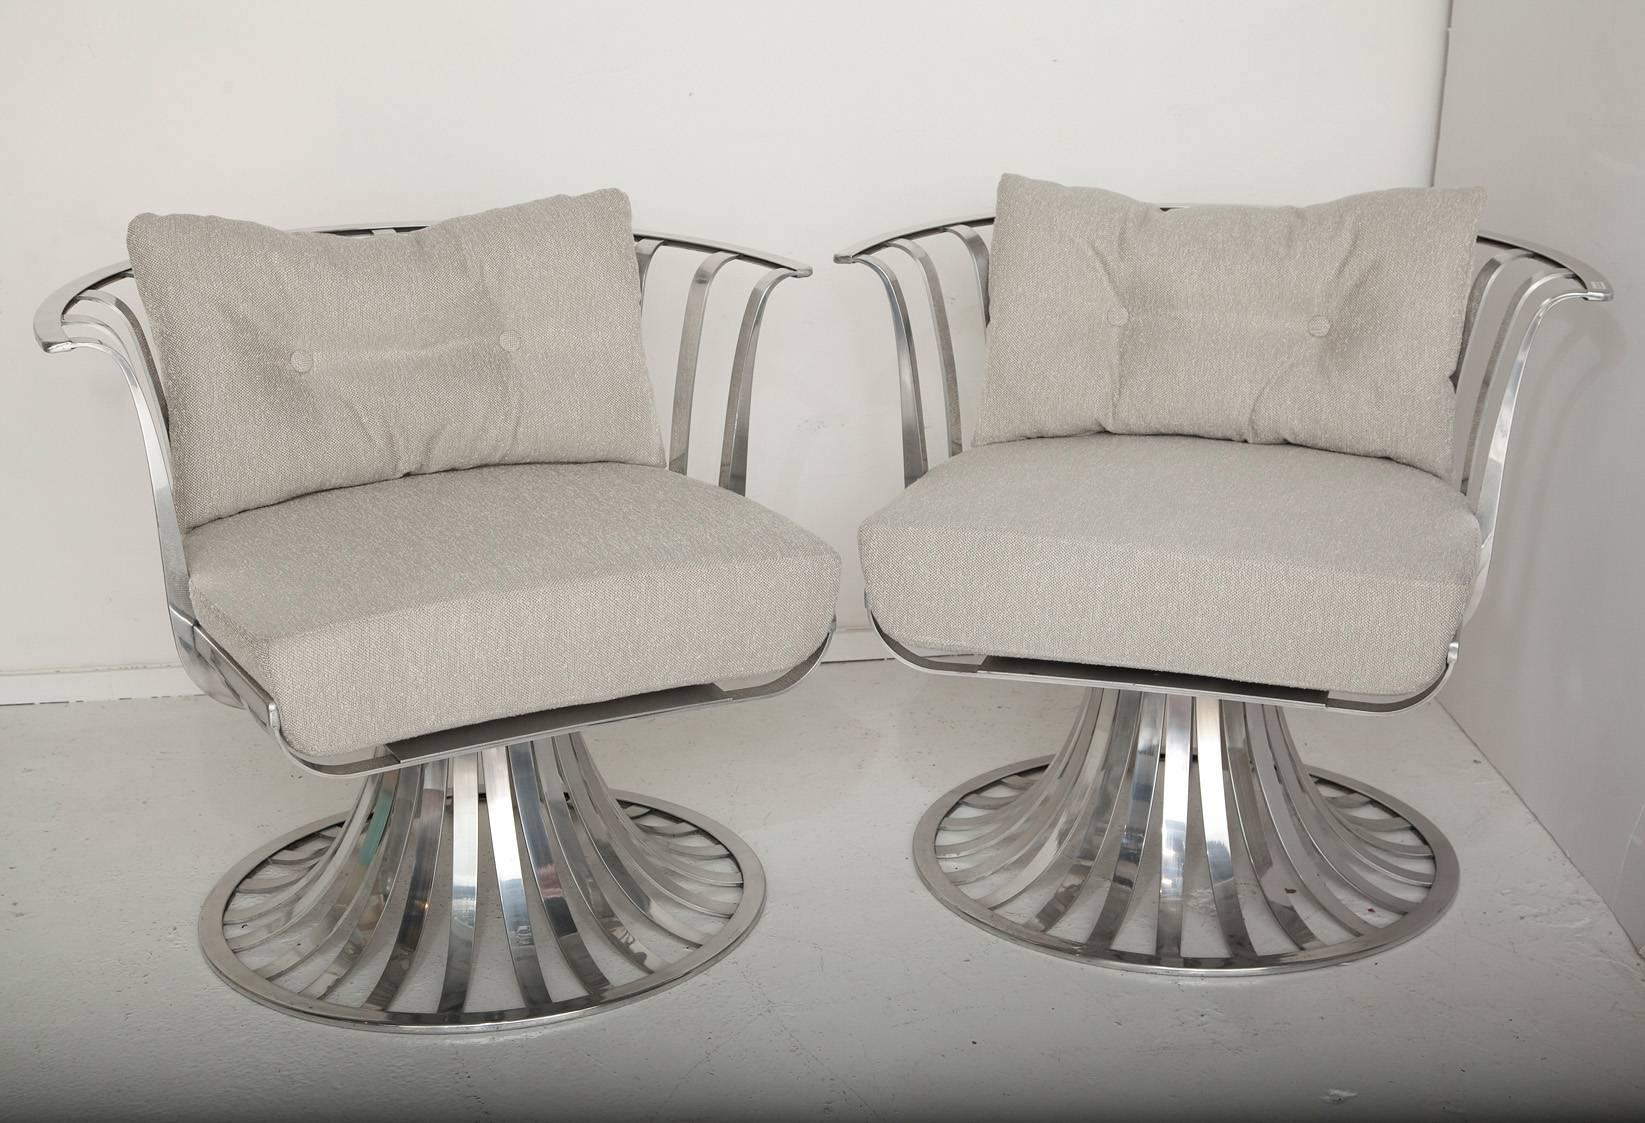 Professionally polished and lacquer sealed, and newly upholstered in a cream-flecked greige all-weather bouclé, these 1960s aluminum chairs by Russell Woodard were designed for outdoors, but we think they're substantial (and glamorous) enough for